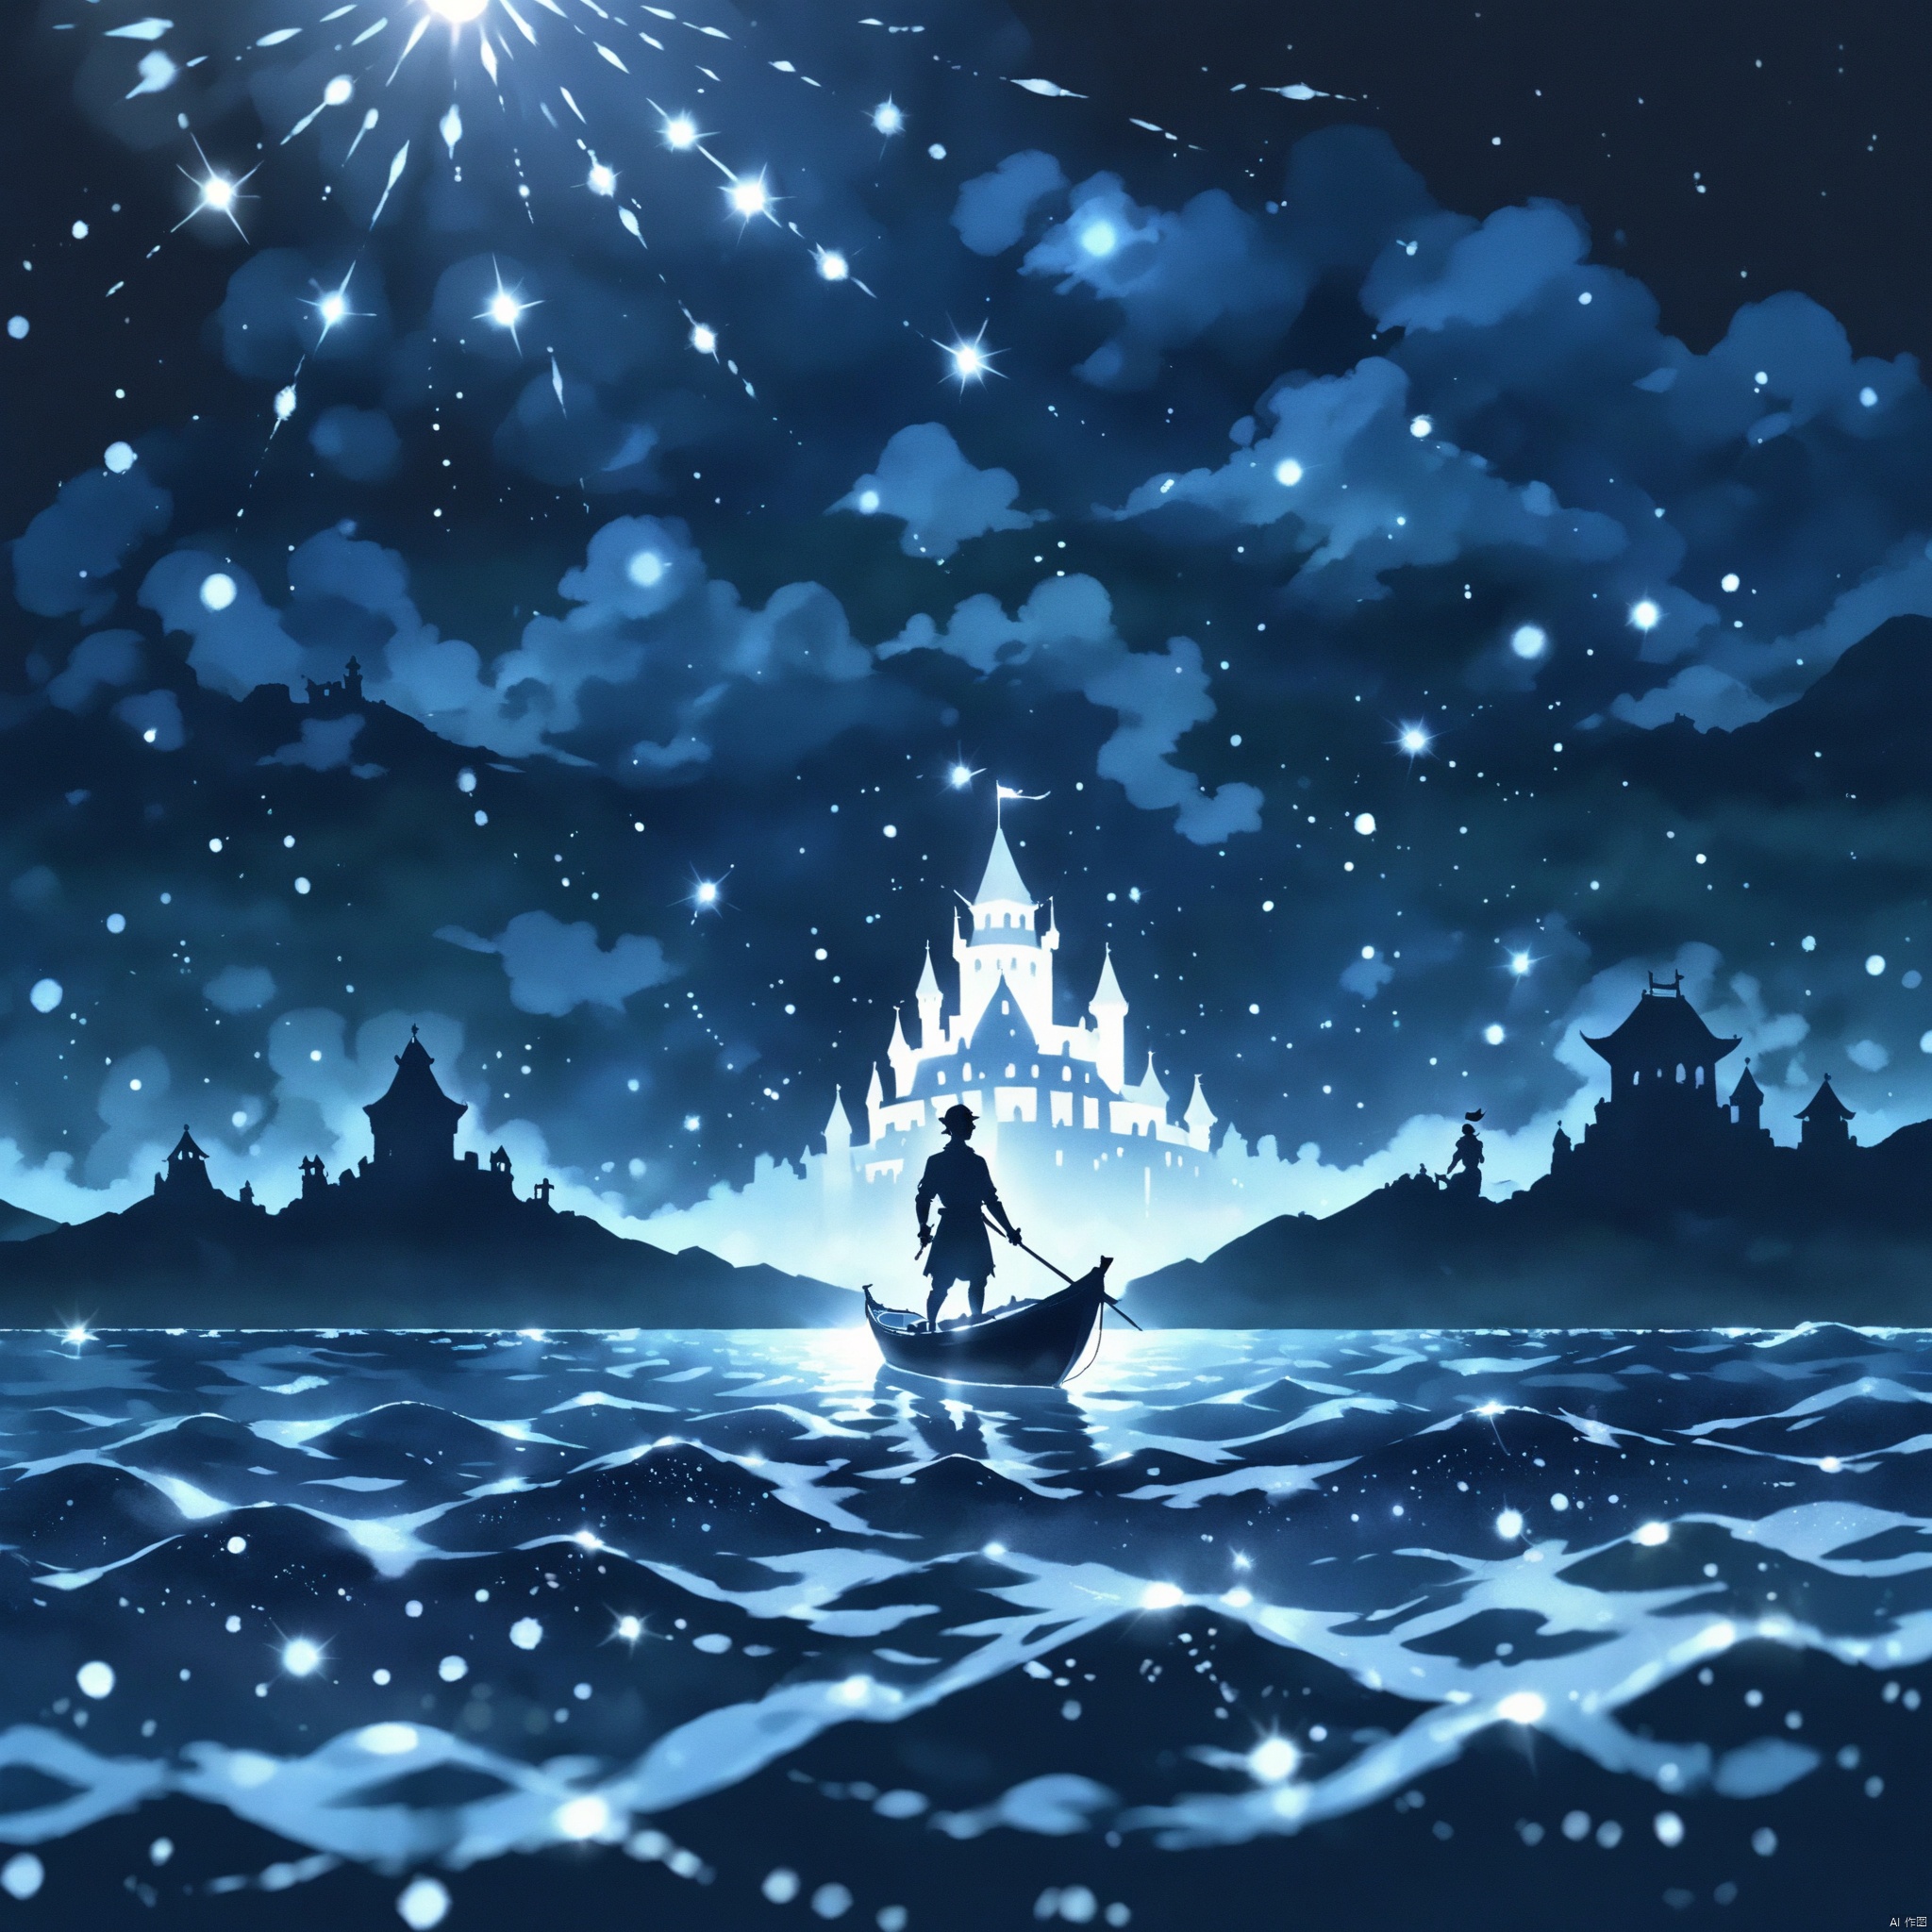 Dot Mat Hologram,isolated dark background,silhouette,backlit,Castle,
a man in a boat floating in the ocean,Night,Sparkling on the sea beautiful,fantasy scene